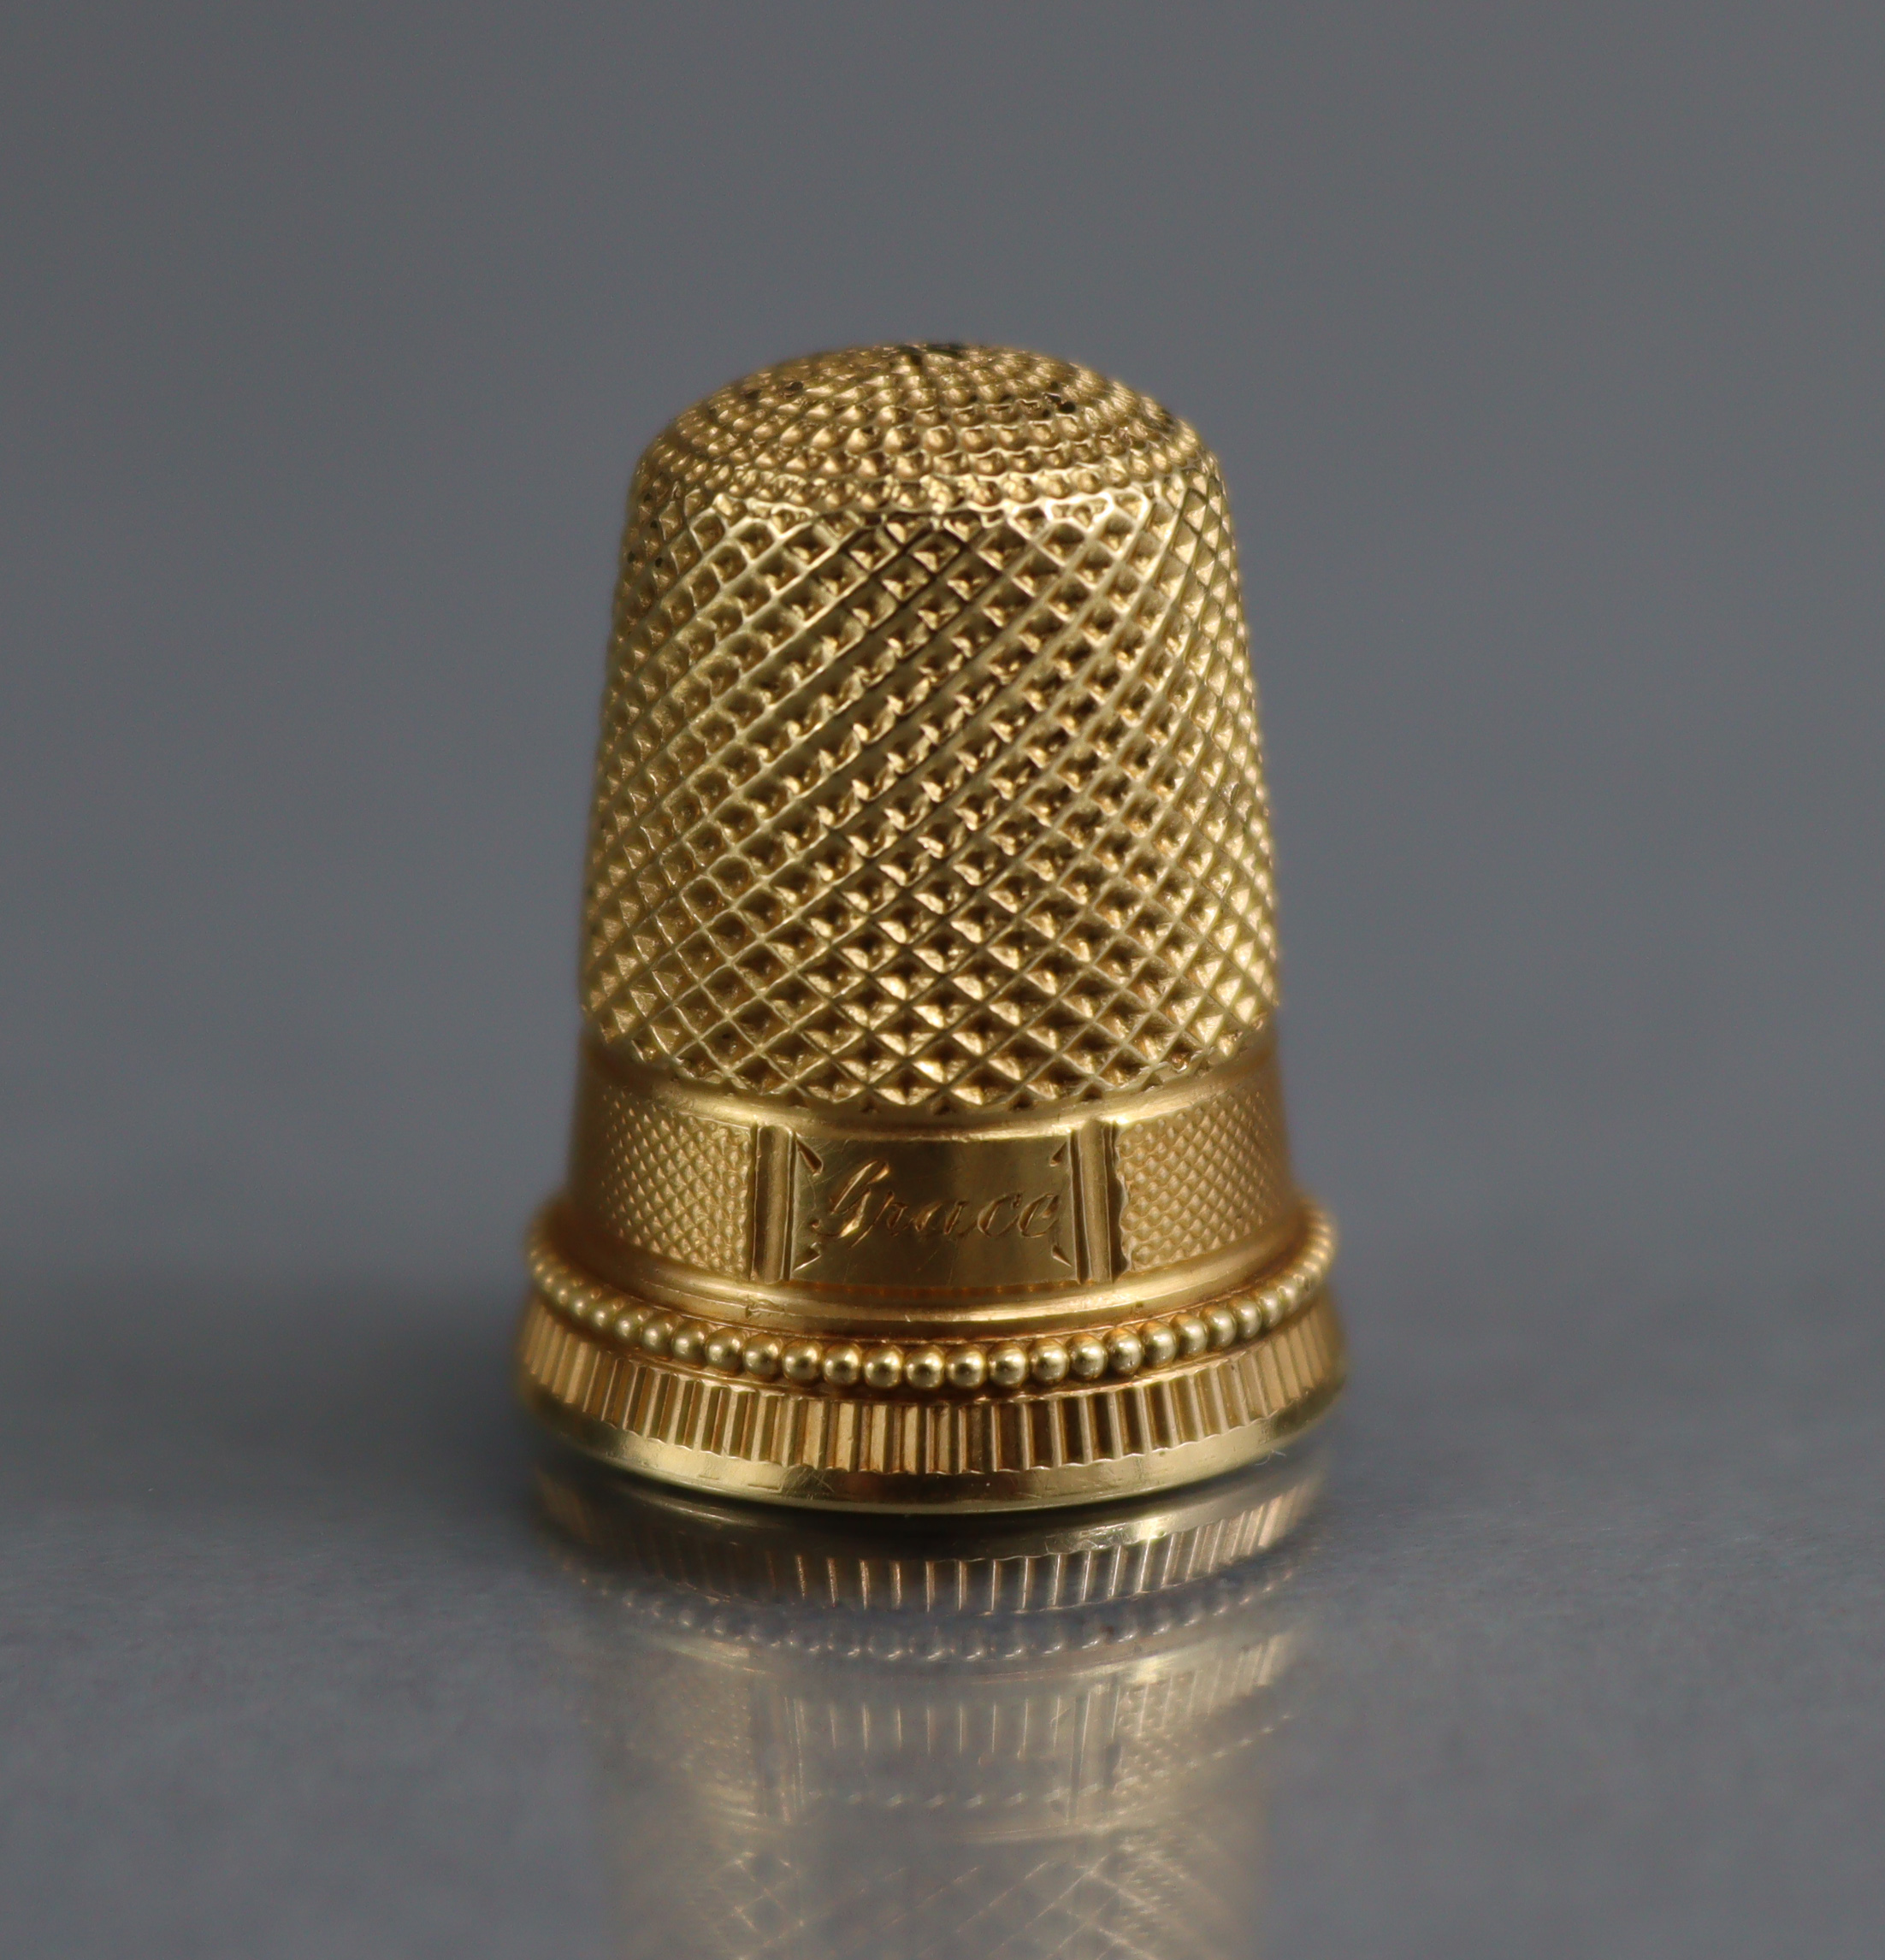 A GOLD THIMBLE with engraved inscription “Grace”, ¾” high, un-marked (6.8gm); in TIFFANY & Co.